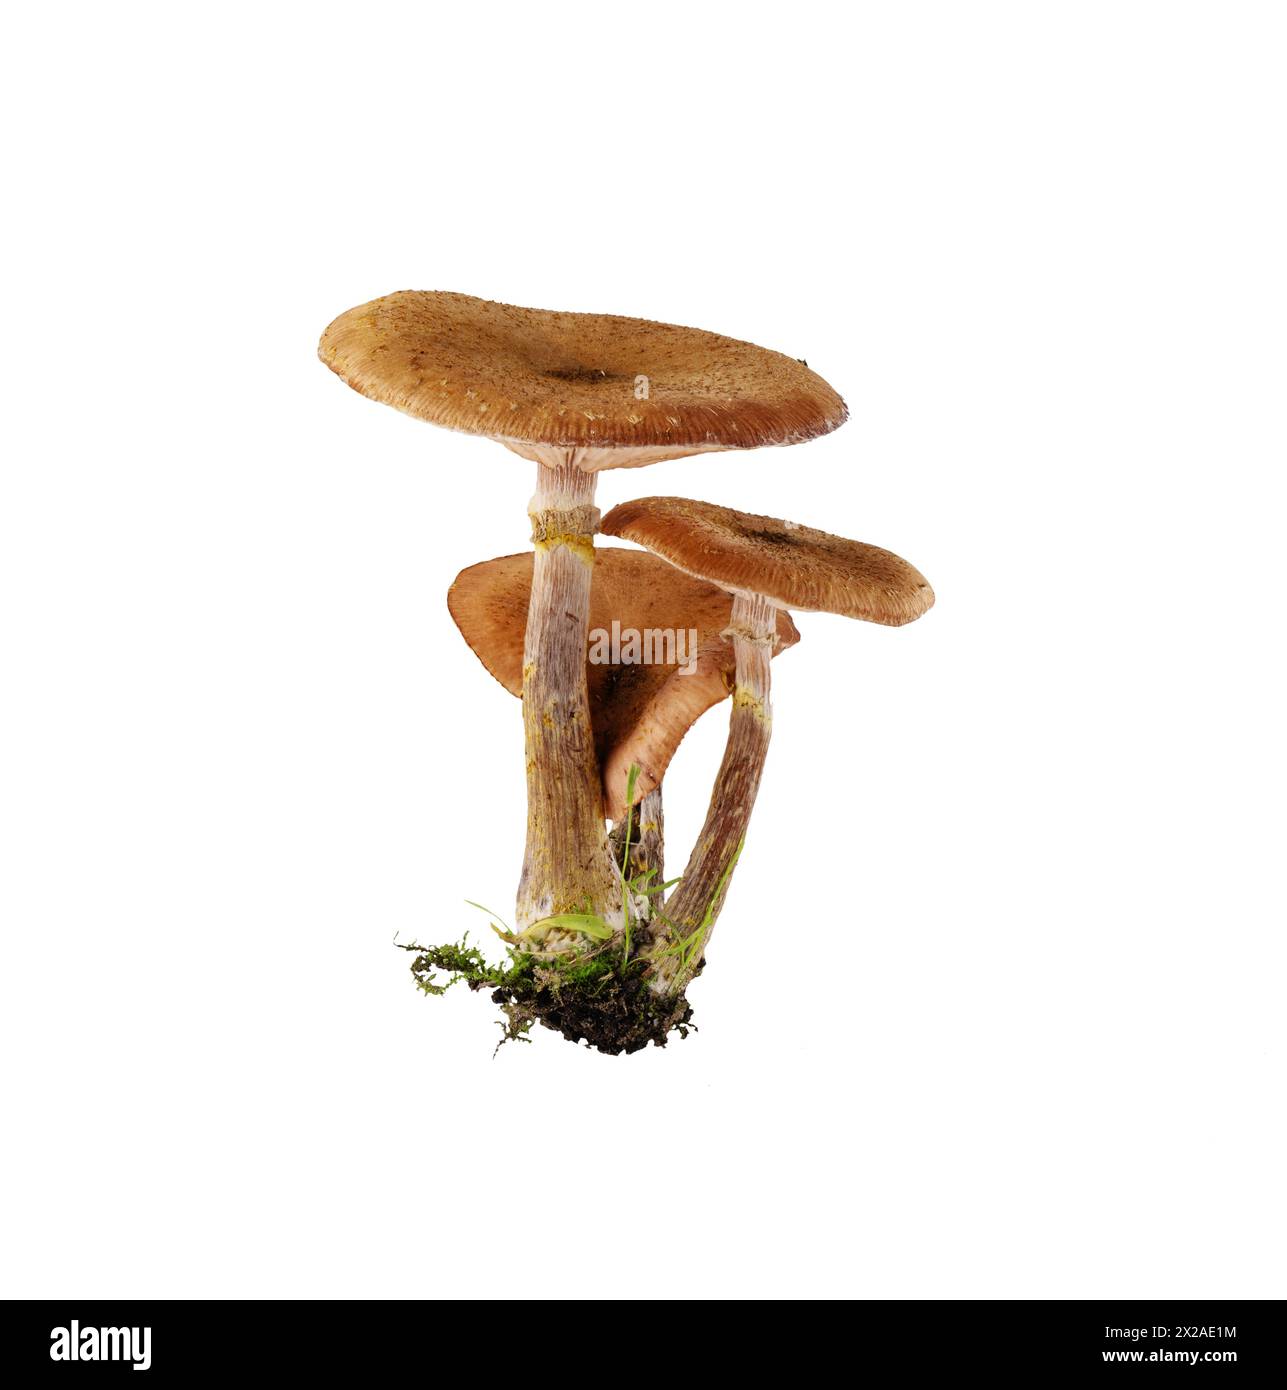 Bunch of mushrooms isolated on white background. Mushrooms with moss cut out for design. Stock Photo